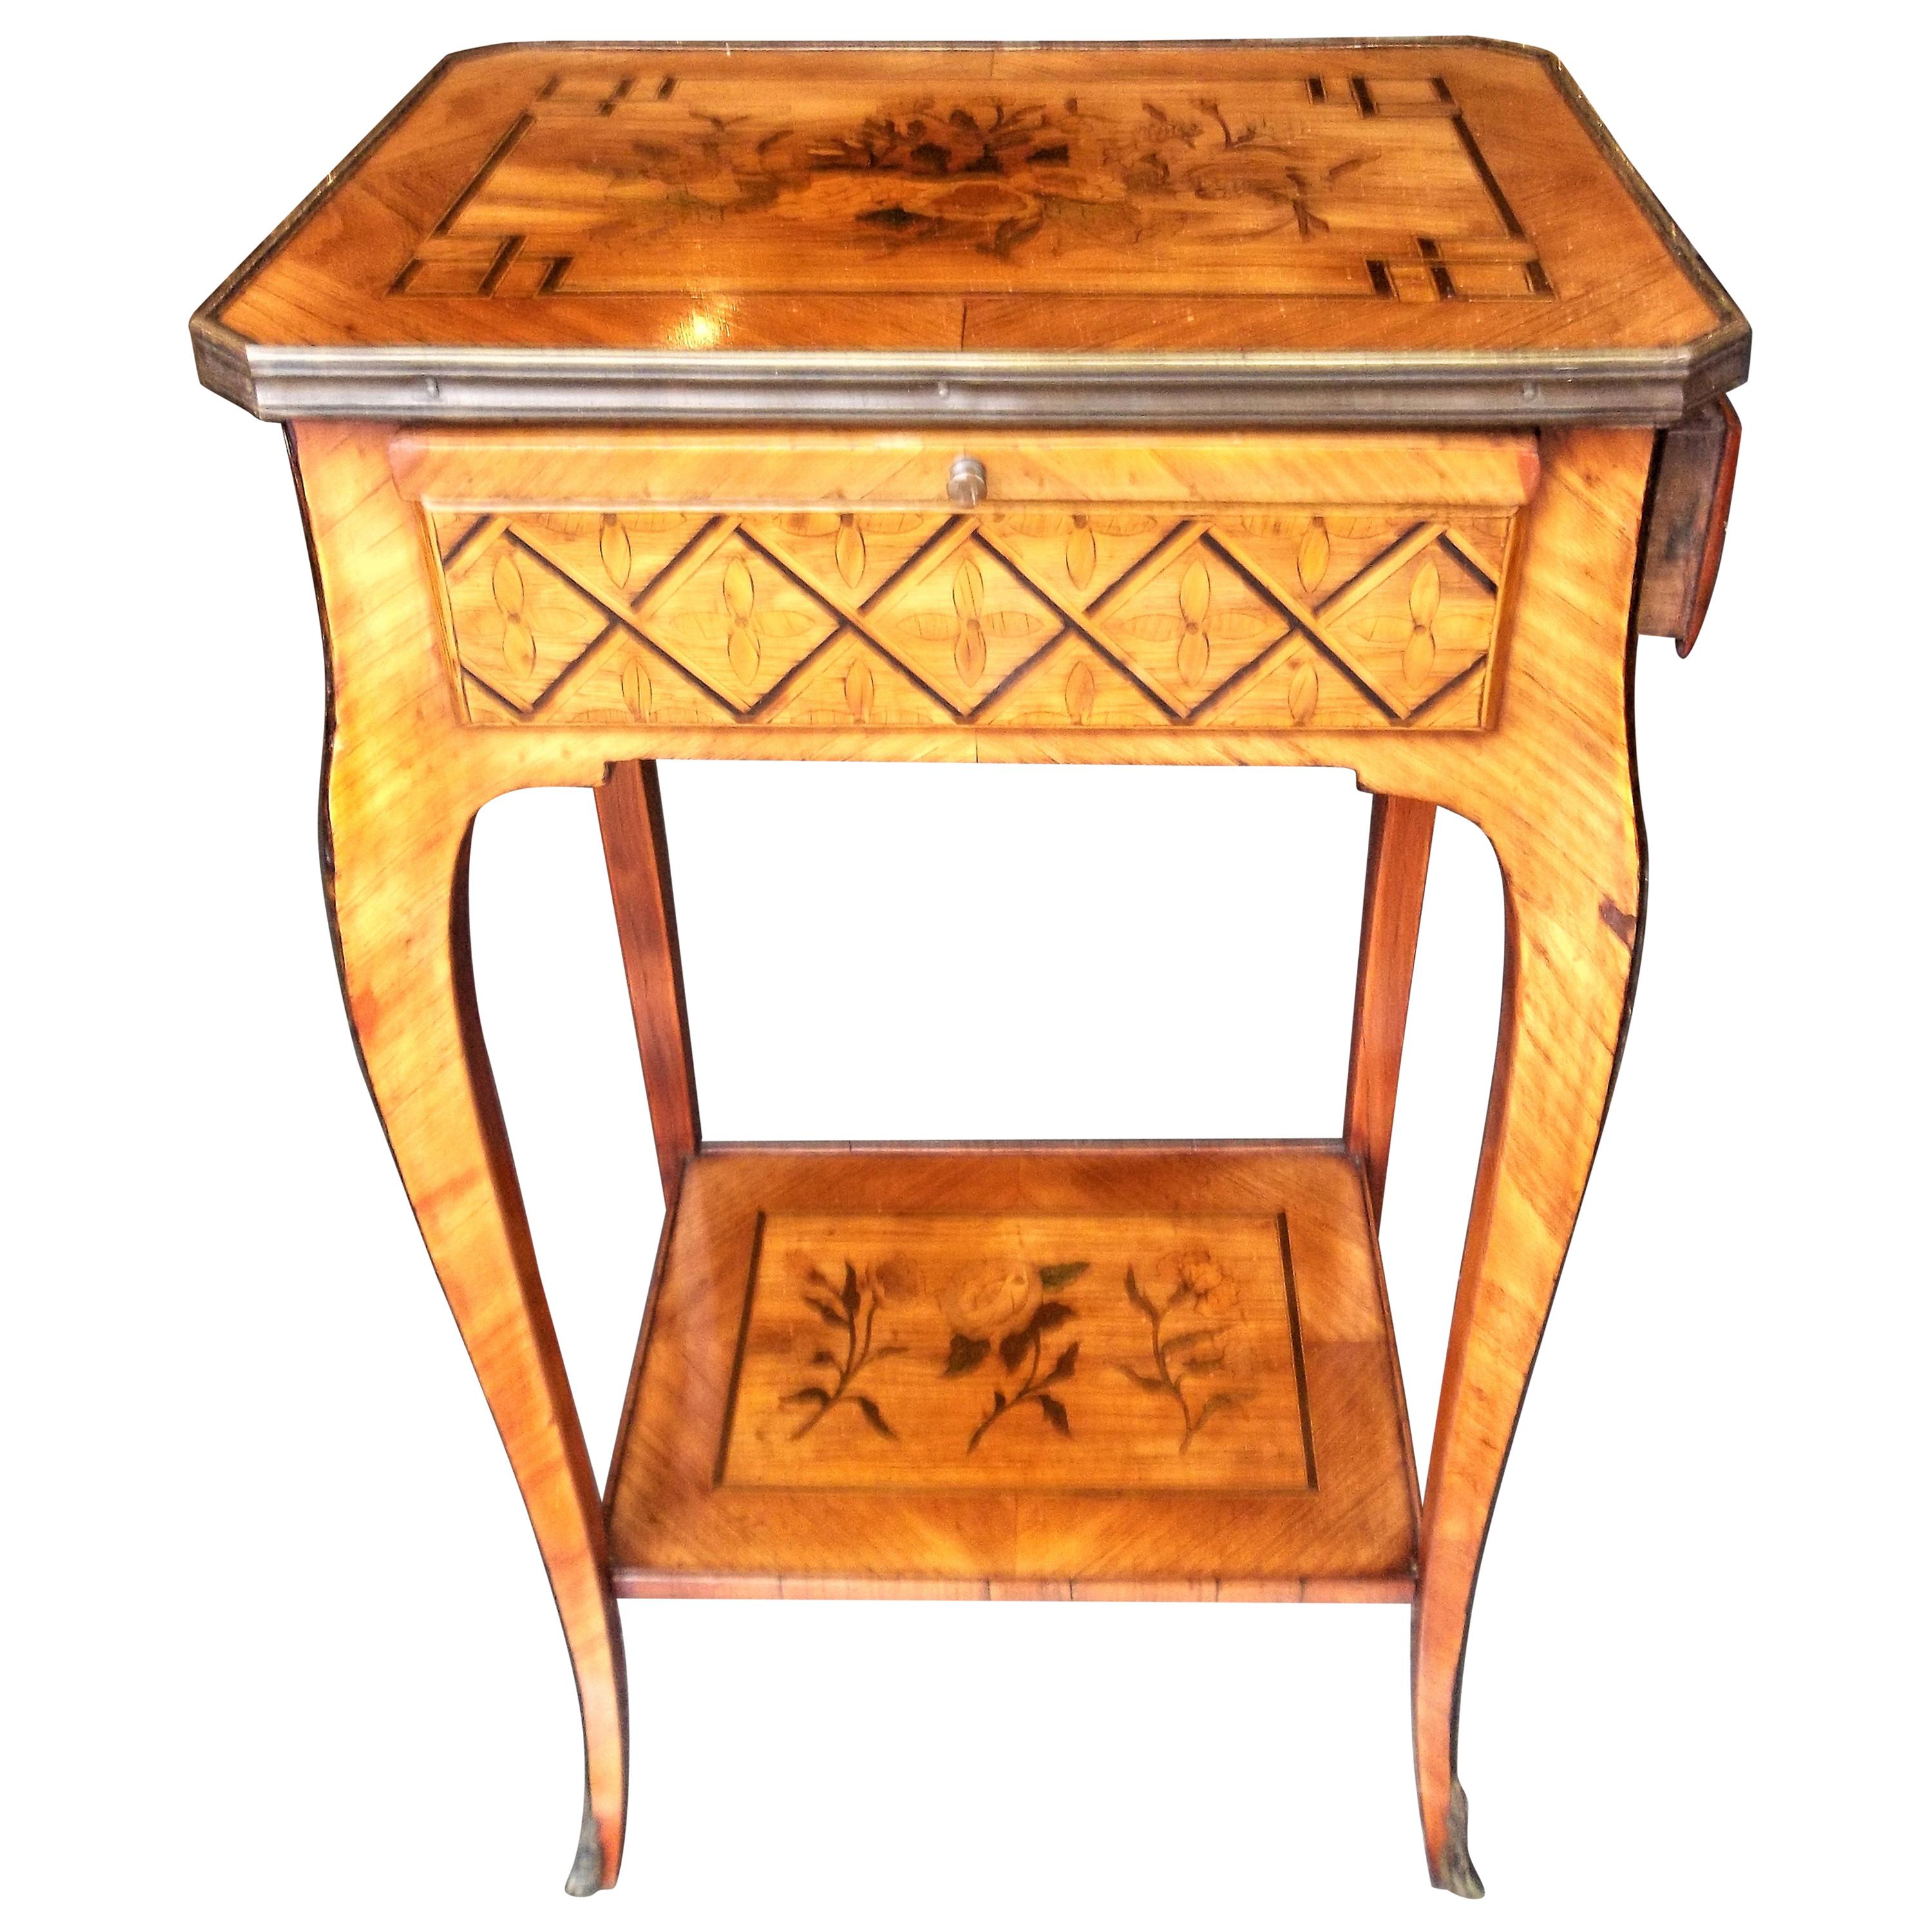 Louis XV Transitional to Louis XVI Style Marquetry Table